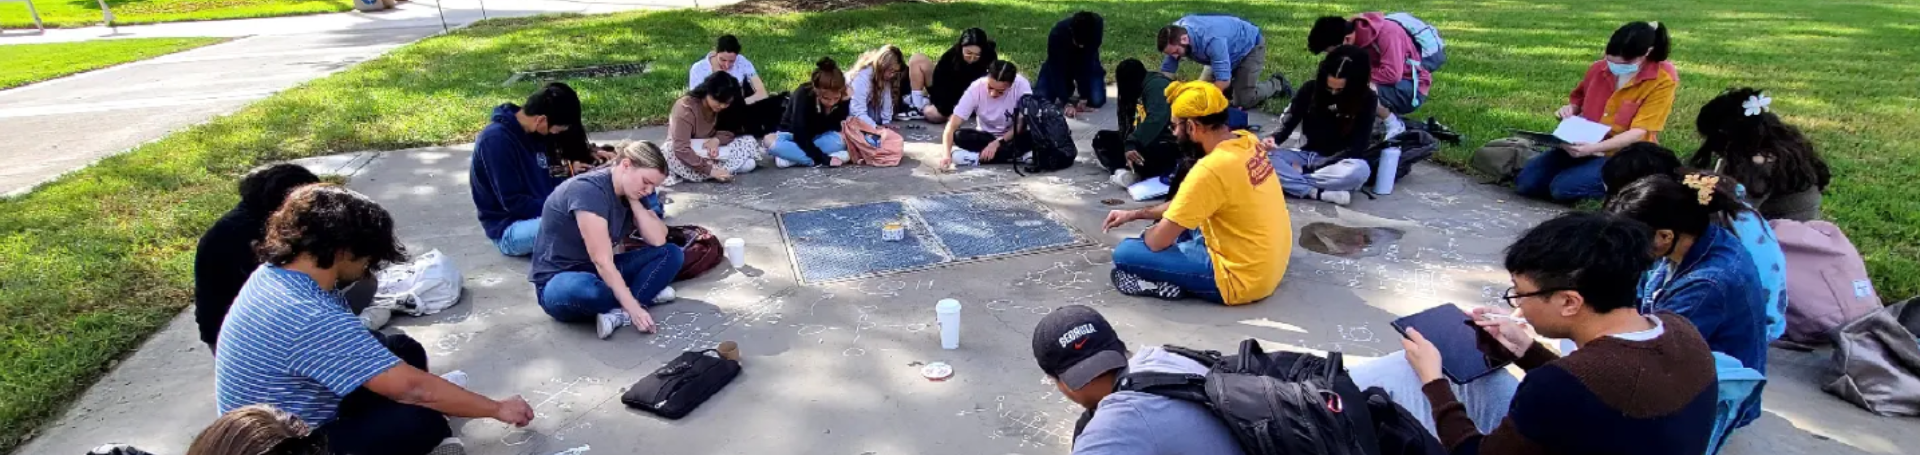 Students drawing on concrete during office hours